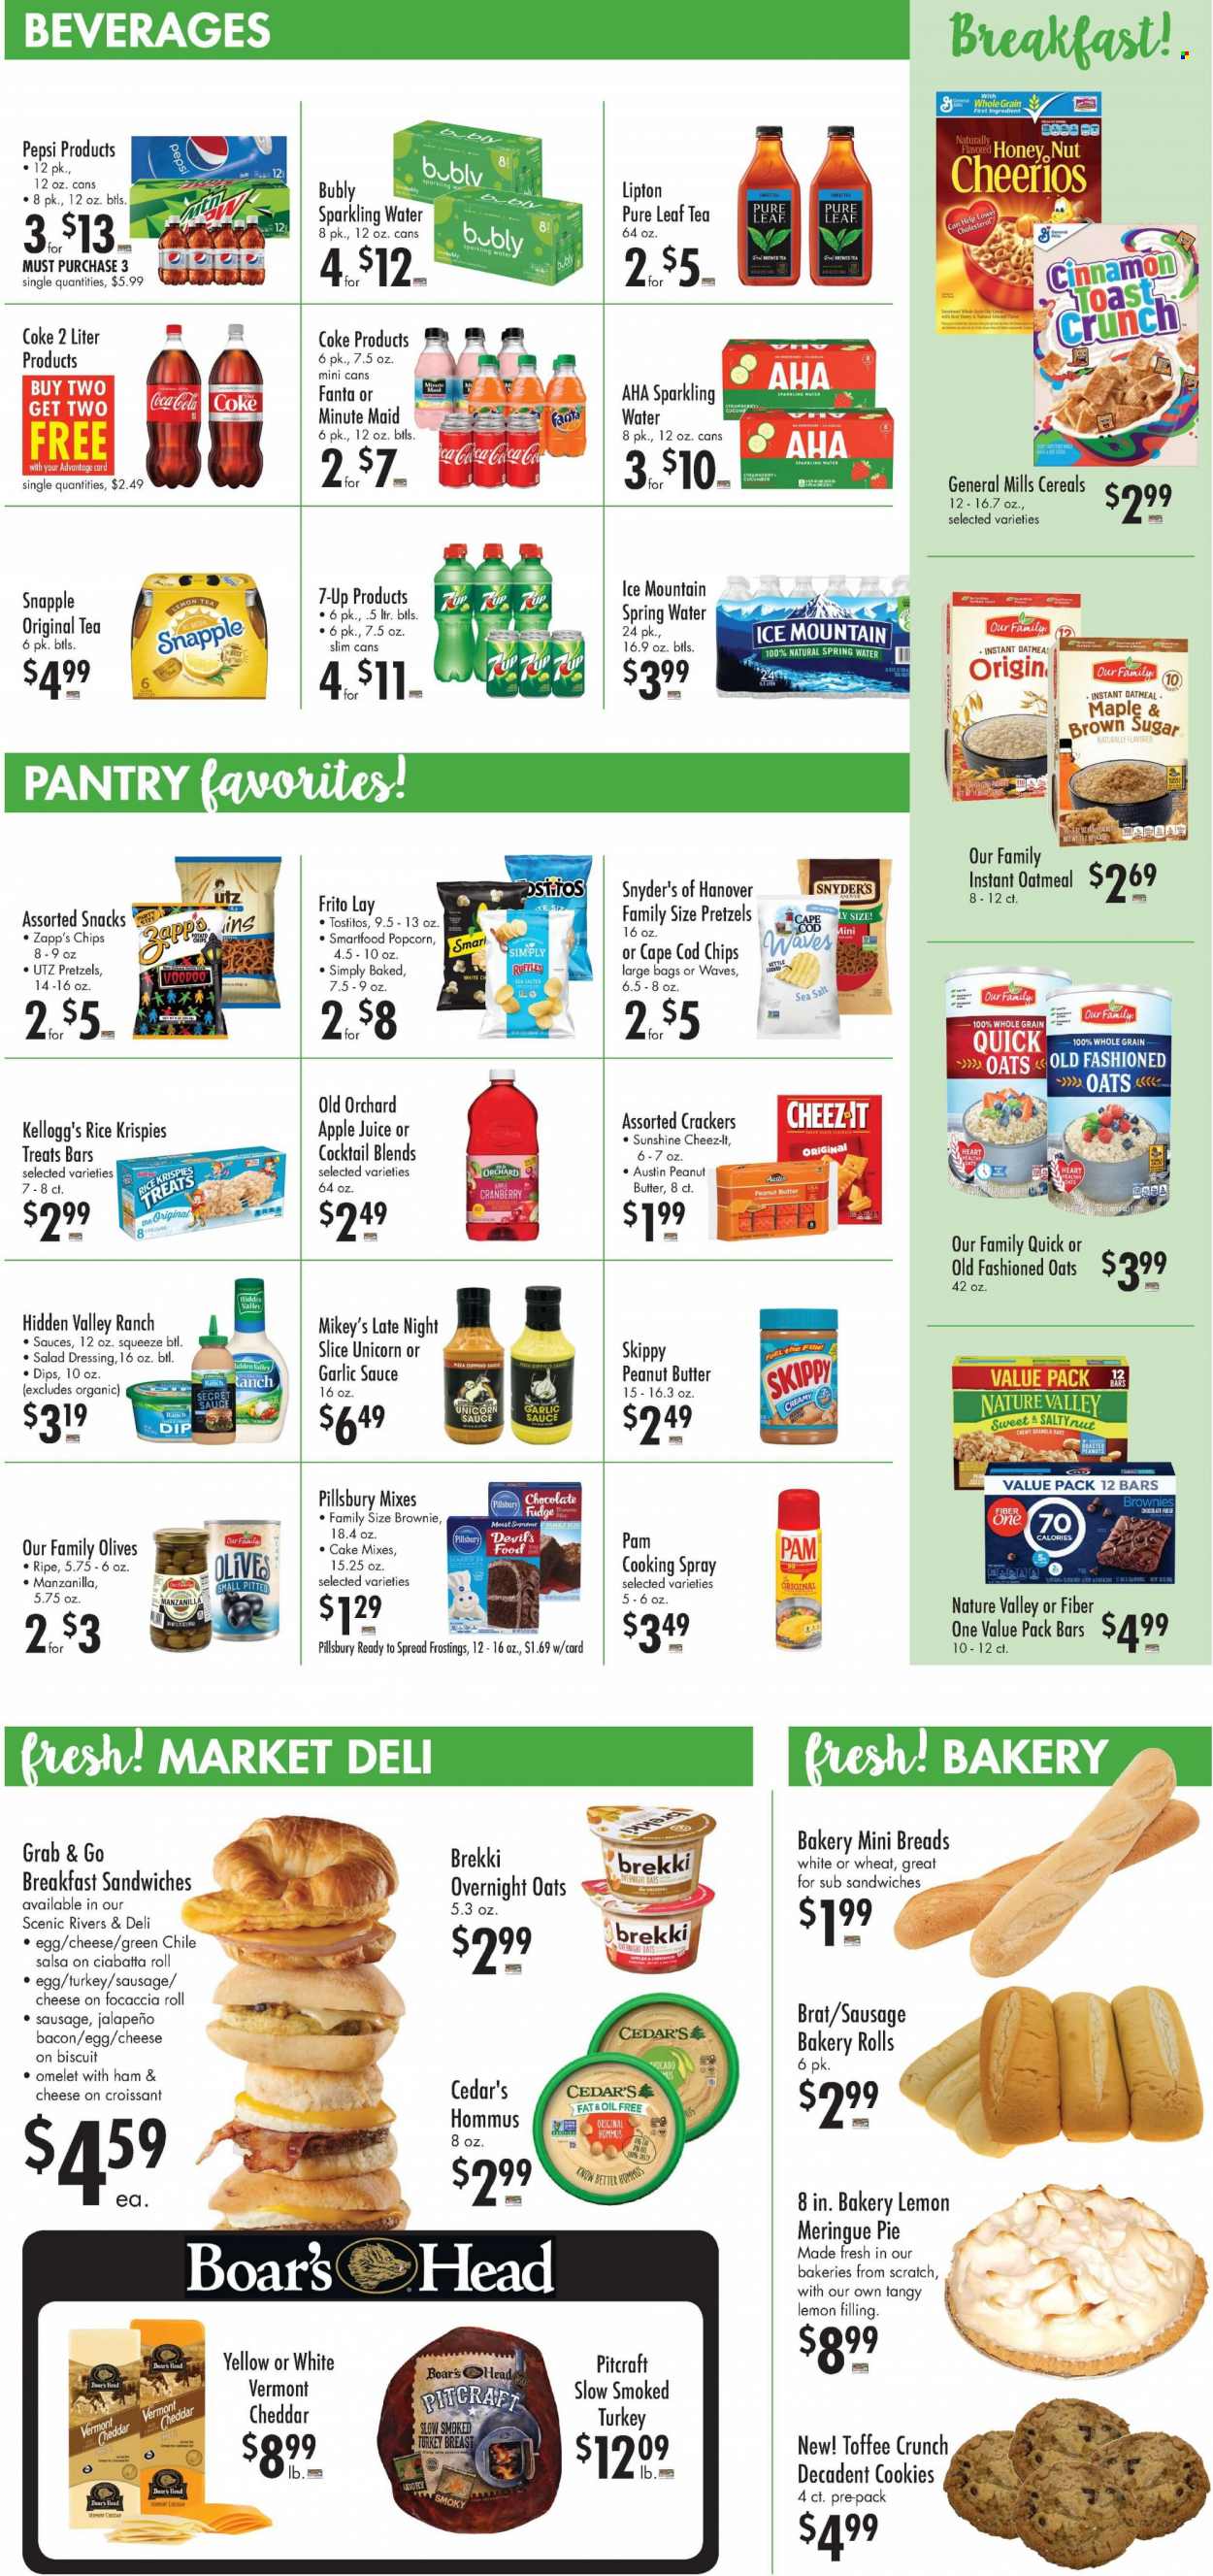 thumbnail - Buehler's Flyer - 05/18/2022 - 05/24/2022 - Sales products - ciabatta, pretzels, cake, pie, focaccia, cupcake, brownies, jalapeño, cod, pizza, Pillsbury, bacon, ham, sausage, hummus, eggs, Sunshine, dip, cookies, fudge, chocolate, snack, toffee, crackers, Kellogg's, biscuit, potato chips, chips, Smartfood, popcorn, Cheez-It, Ruffles, Tostitos, oatmeal, olives, cereals, Cheerios, Rice Krispies, Quick Oats, Nature Valley, Fiber One, cinnamon, salad dressing, dressing, salsa, garlic sauce, cooking spray, peanut butter, roasted peanuts, peanuts, apple juice, Coca-Cola, Pepsi, juice, Fanta, Lipton, 7UP, Snapple, fruit punch, spring water, sparkling water, Ice Mountain, tea, Pure Leaf, Gain, bag. Page 2.